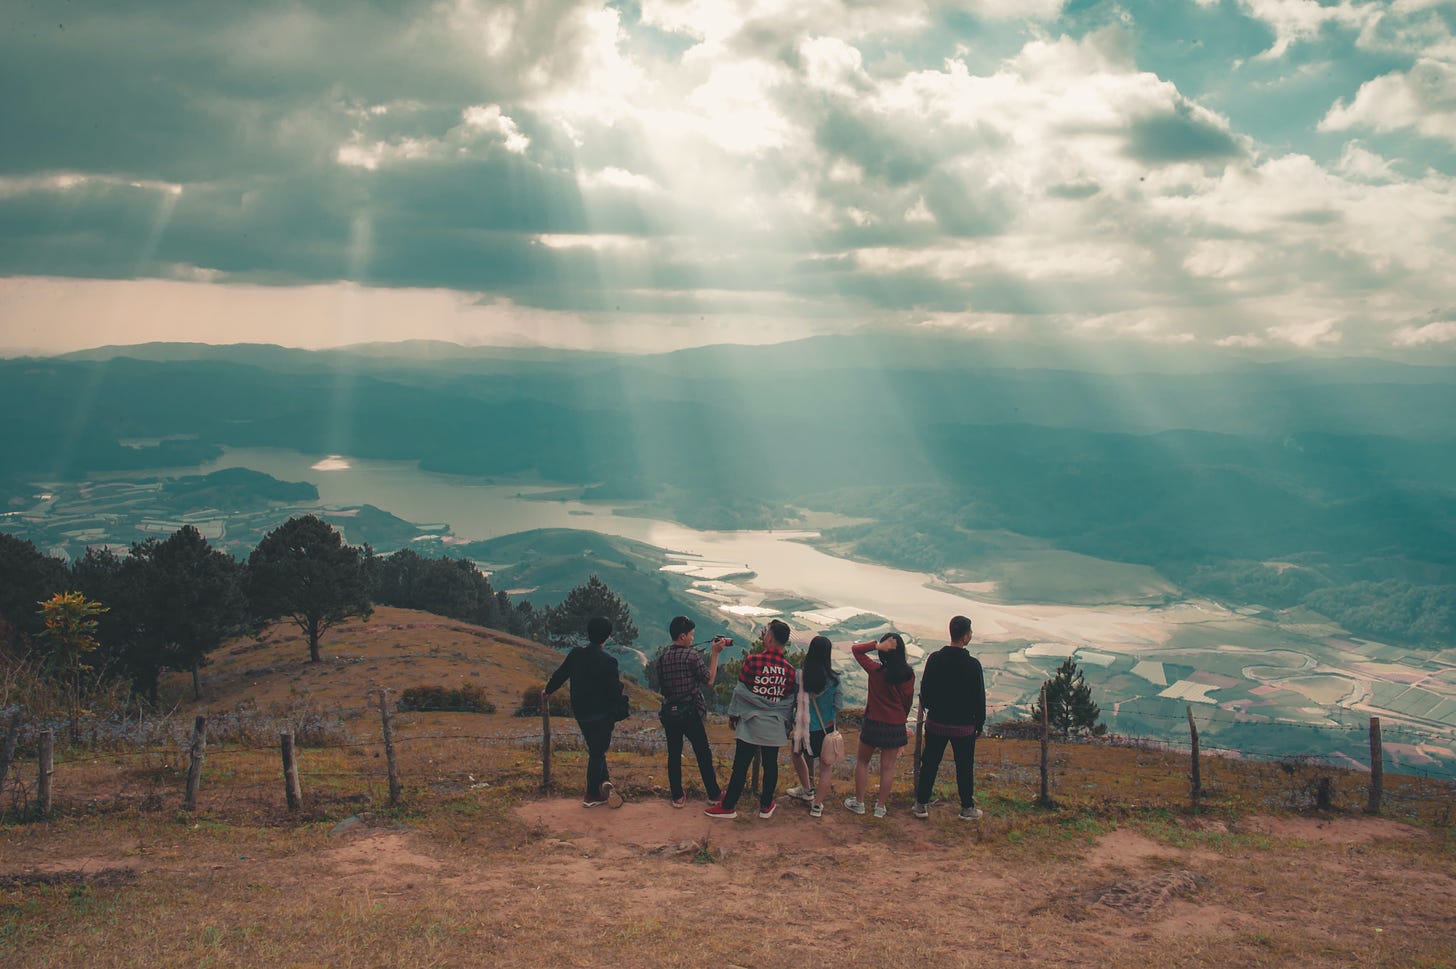 A group of people standing on a hill overlooking a valley.